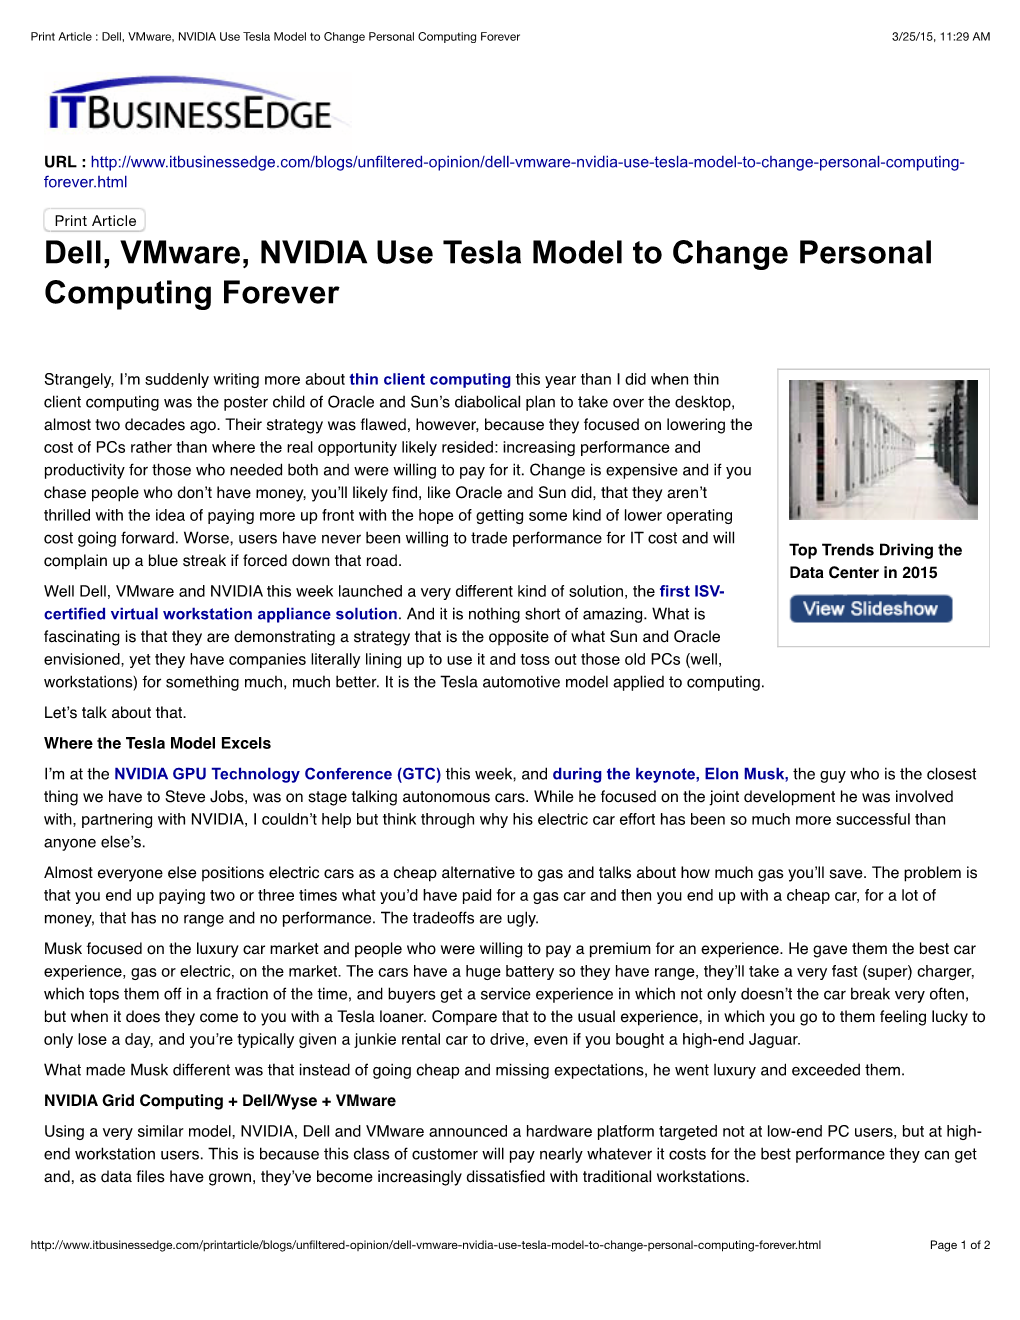 Dell, Vmware, NVIDIA Use Tesla Model to Change Personal Computing Forever 3/25/15, 11:29 AM